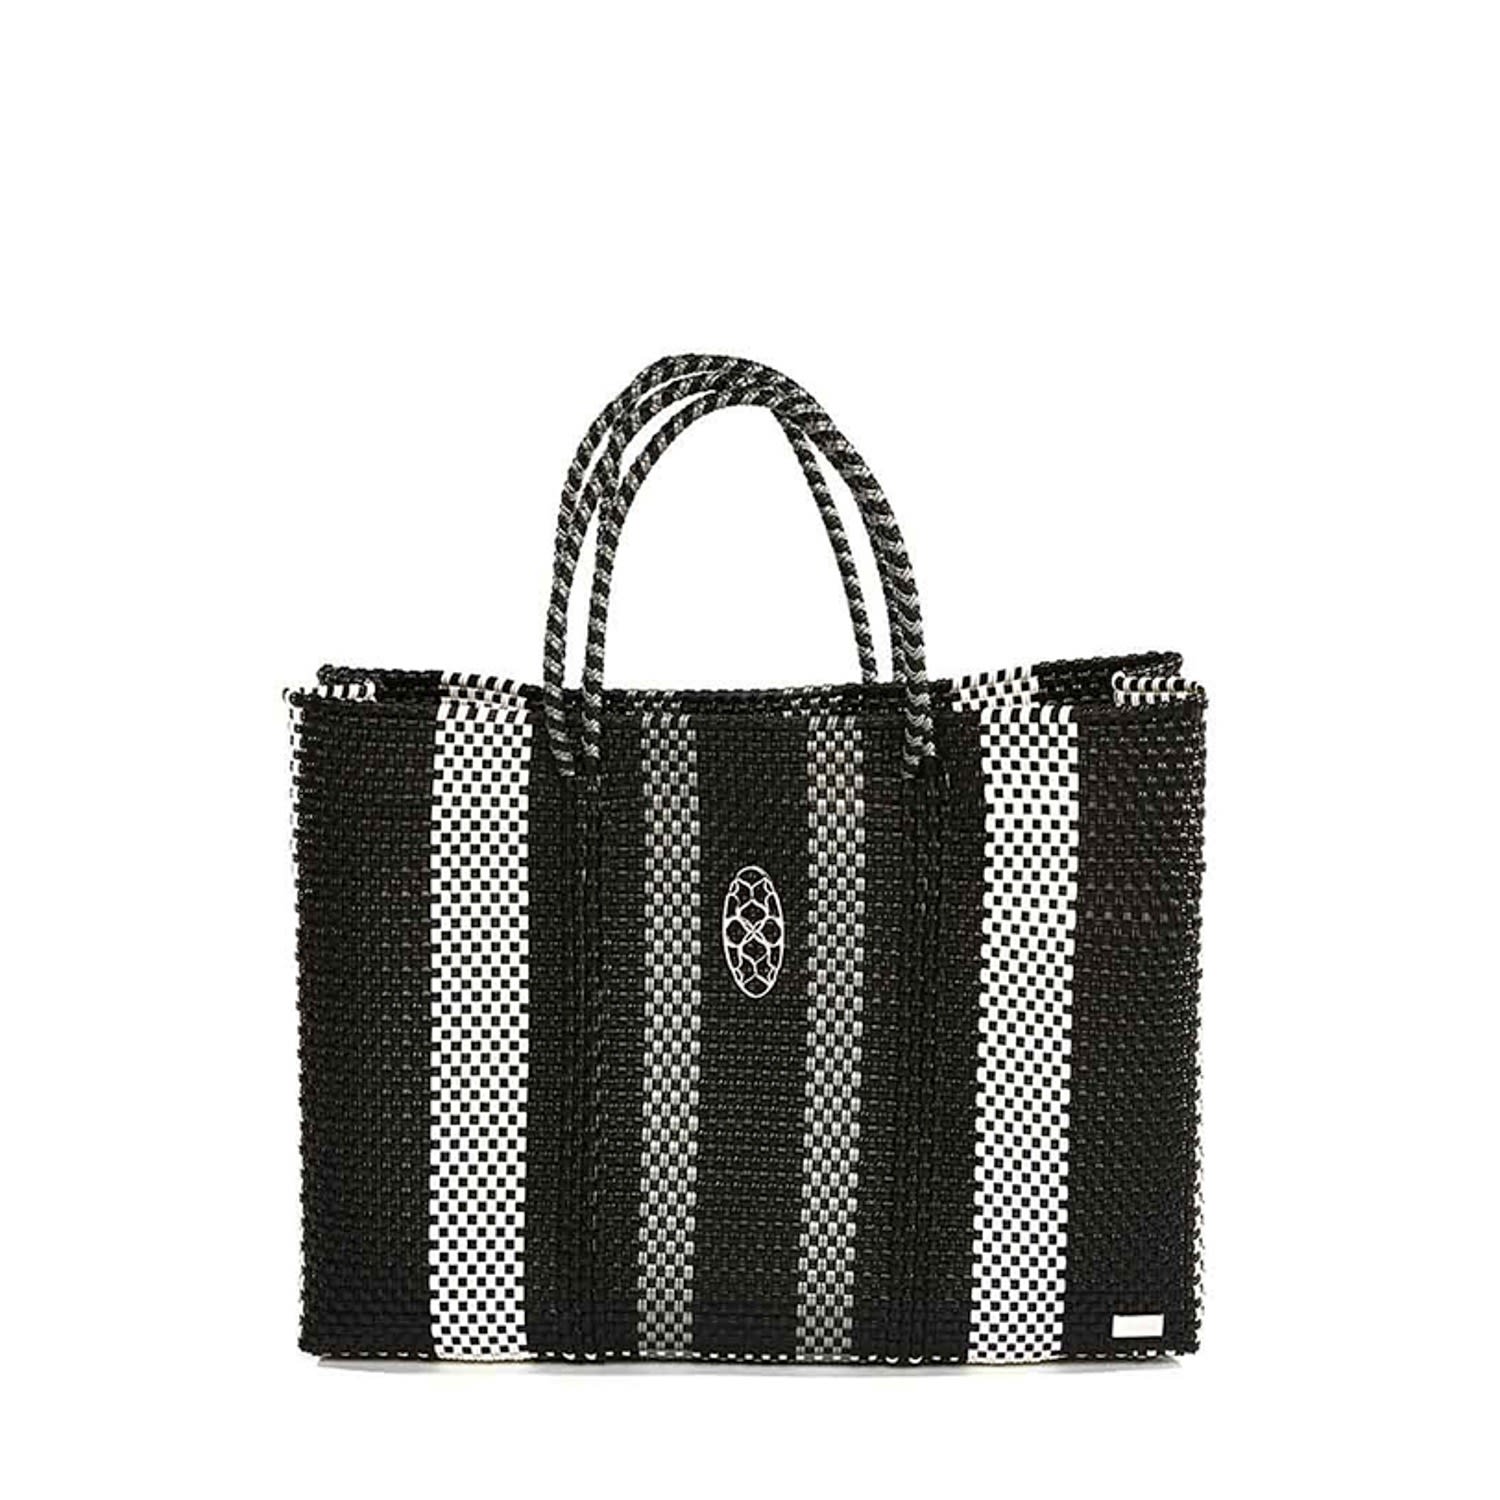 Women’s Black White Book Tote Bag With Clutch Lolas Bag